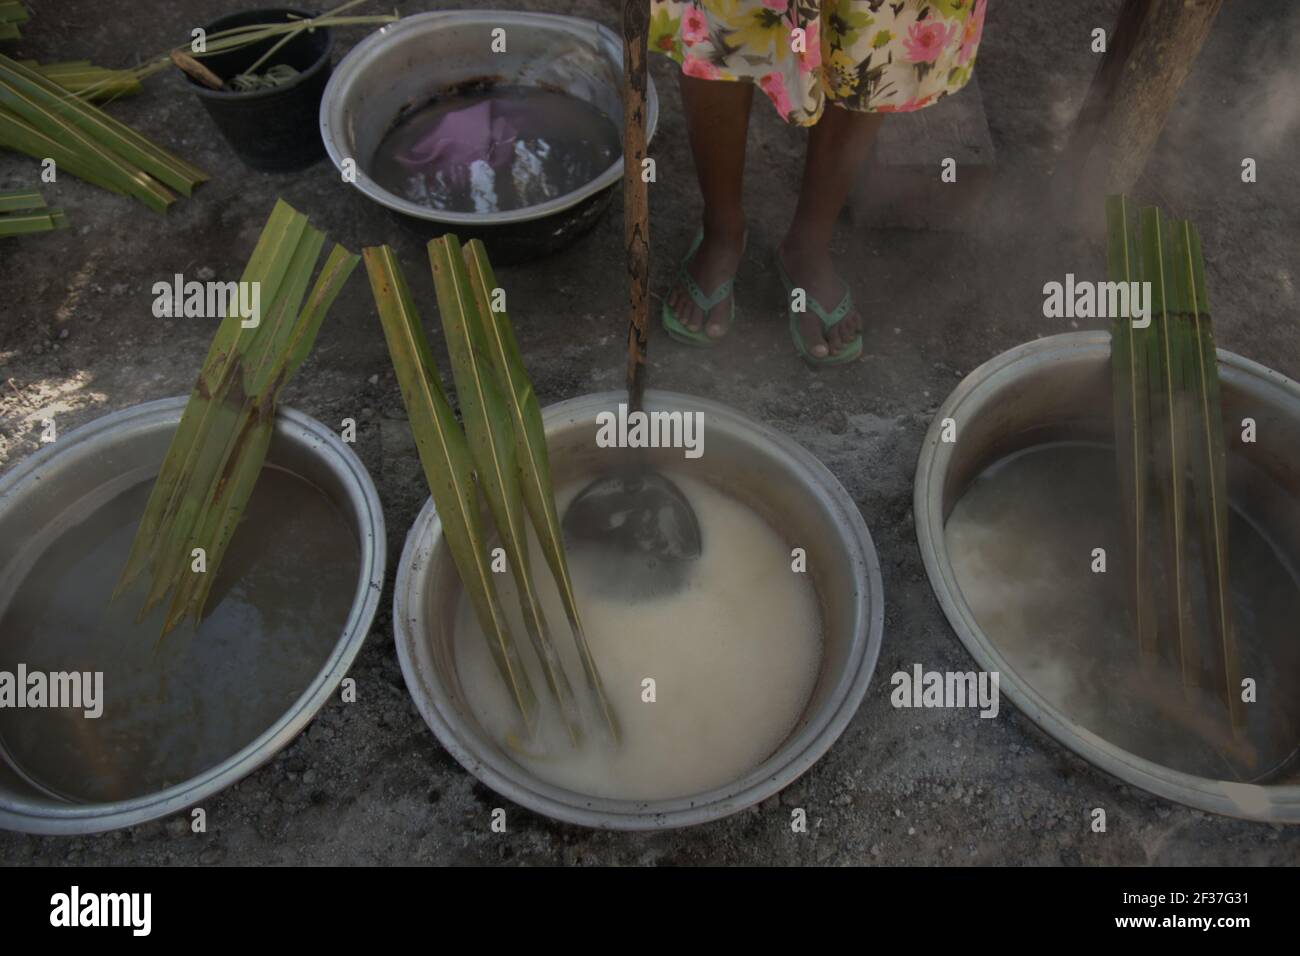 A woman boiling palm sap to make palm sugar, an alternative source of income for villagers living in Rote Island, Indonesia. Stock Photo